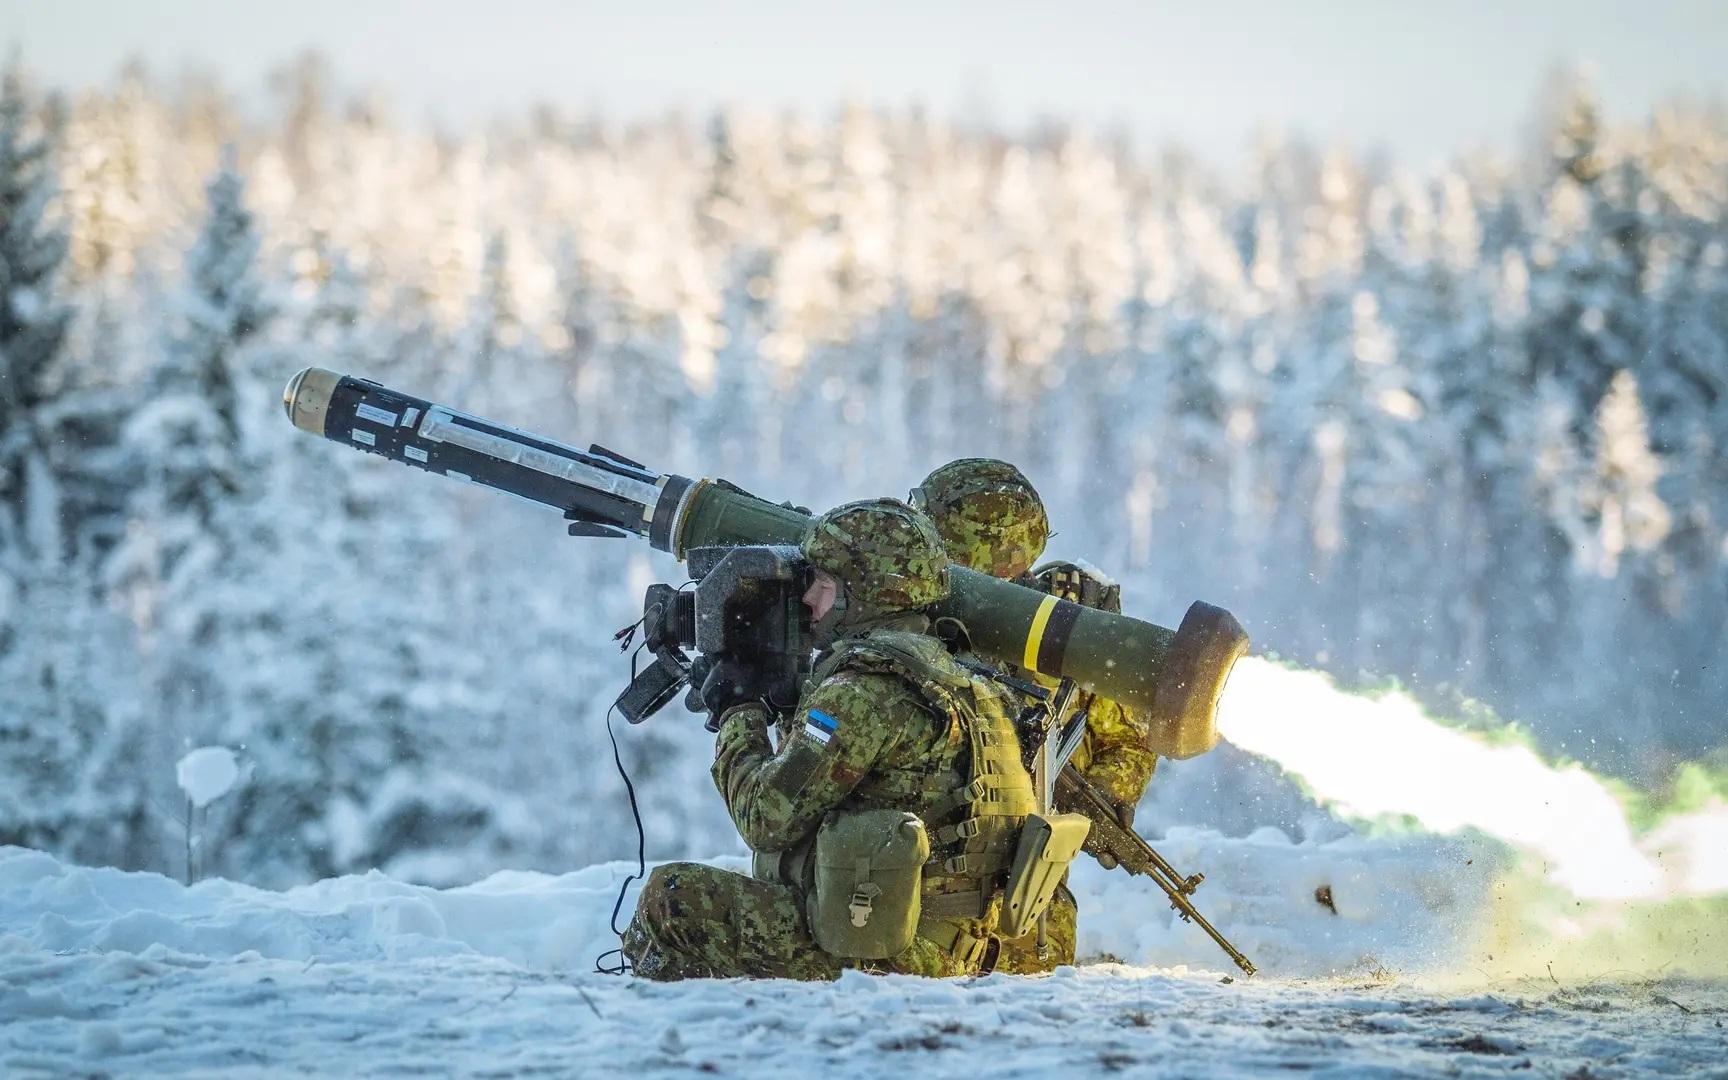 The Estonian Army carried out the first live fire exercise with the Javelin anti-tank guided missile system